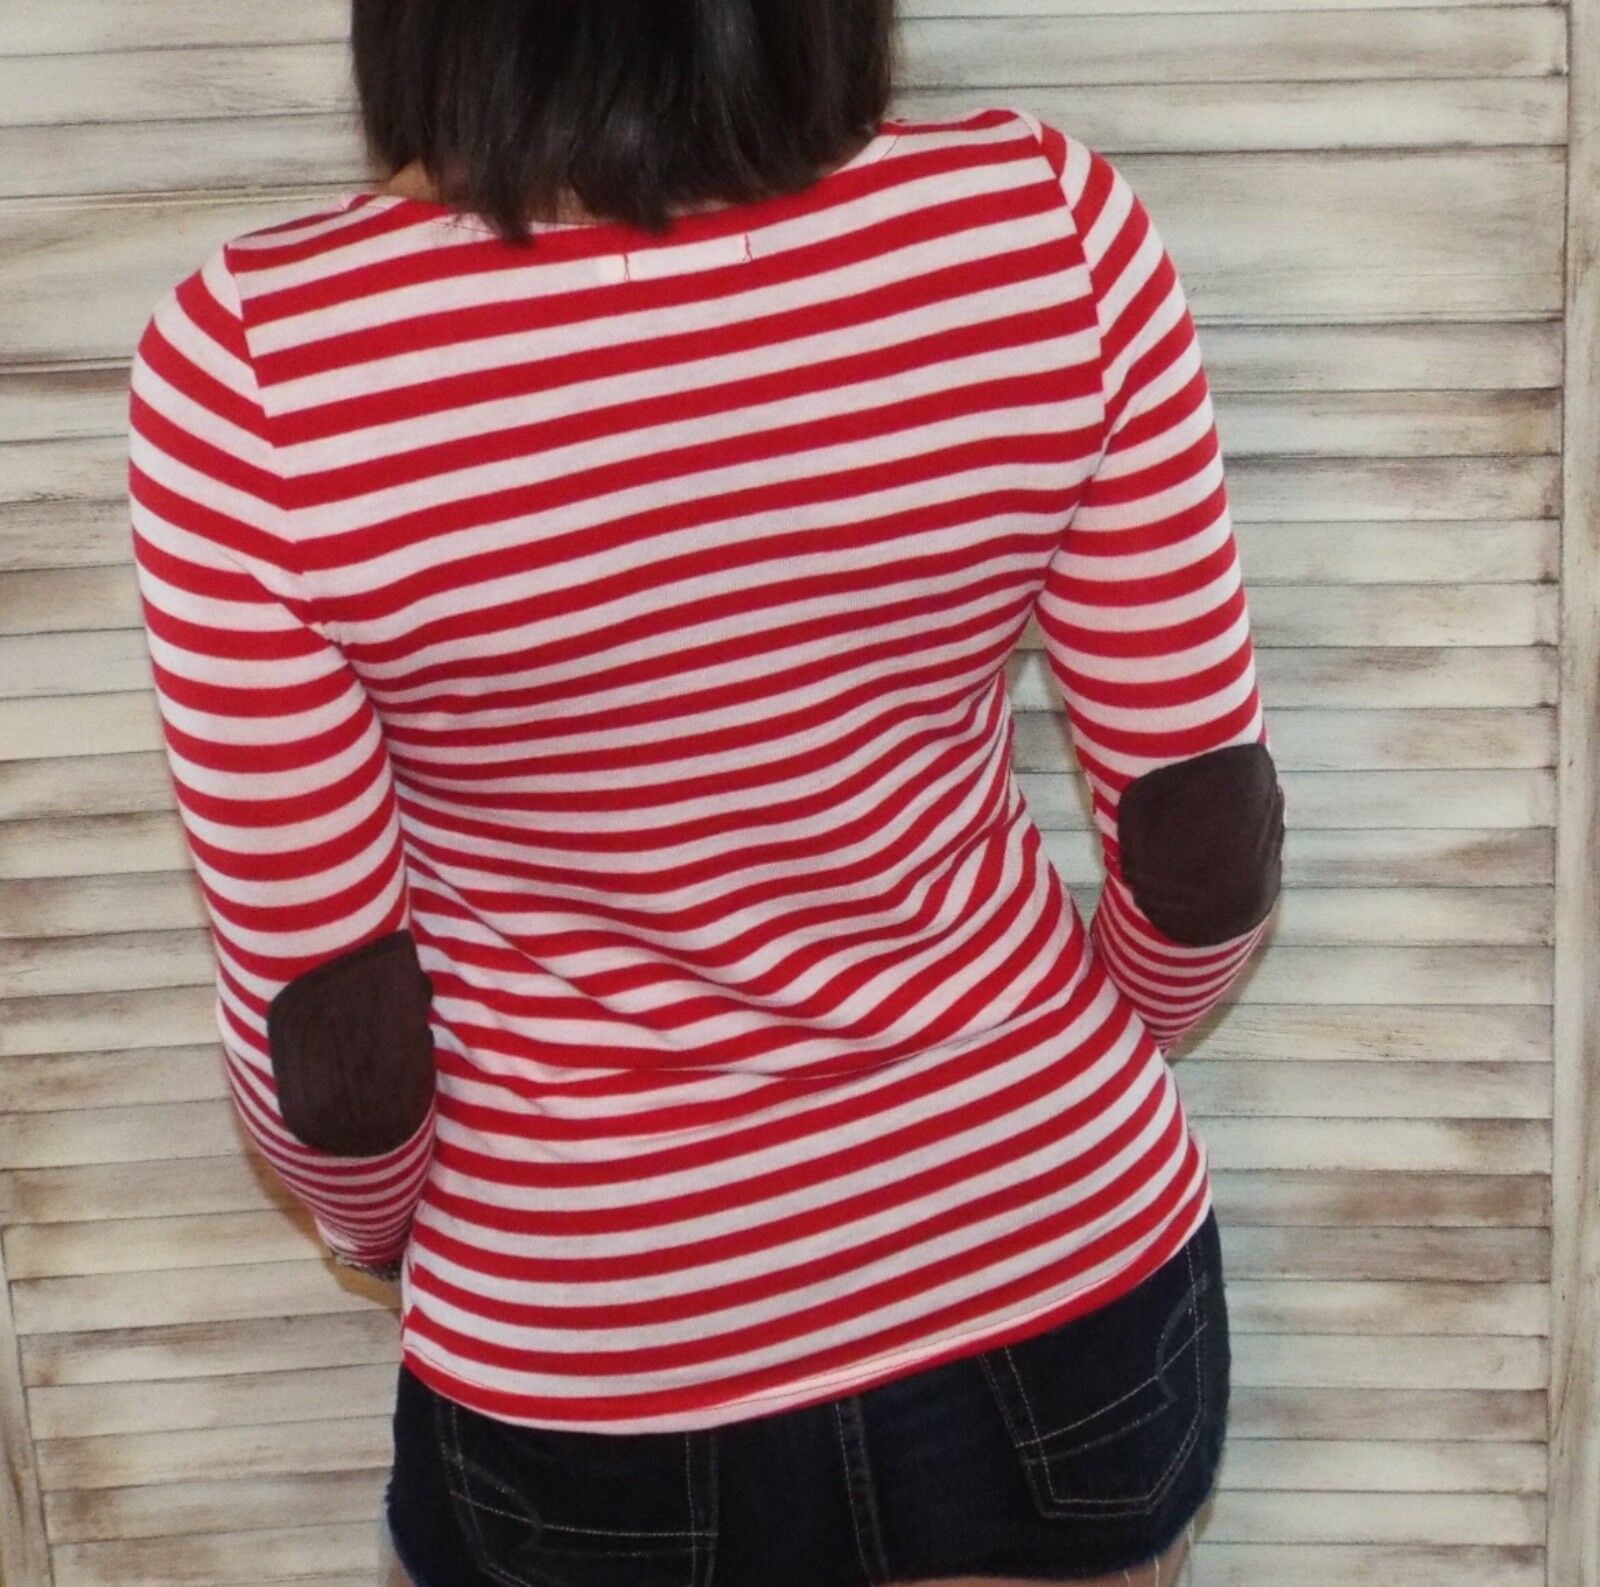 Sexy Nautical Striped Rugby Preppy Elbow Patch Stretch L/S Shirt Red White S/M/L